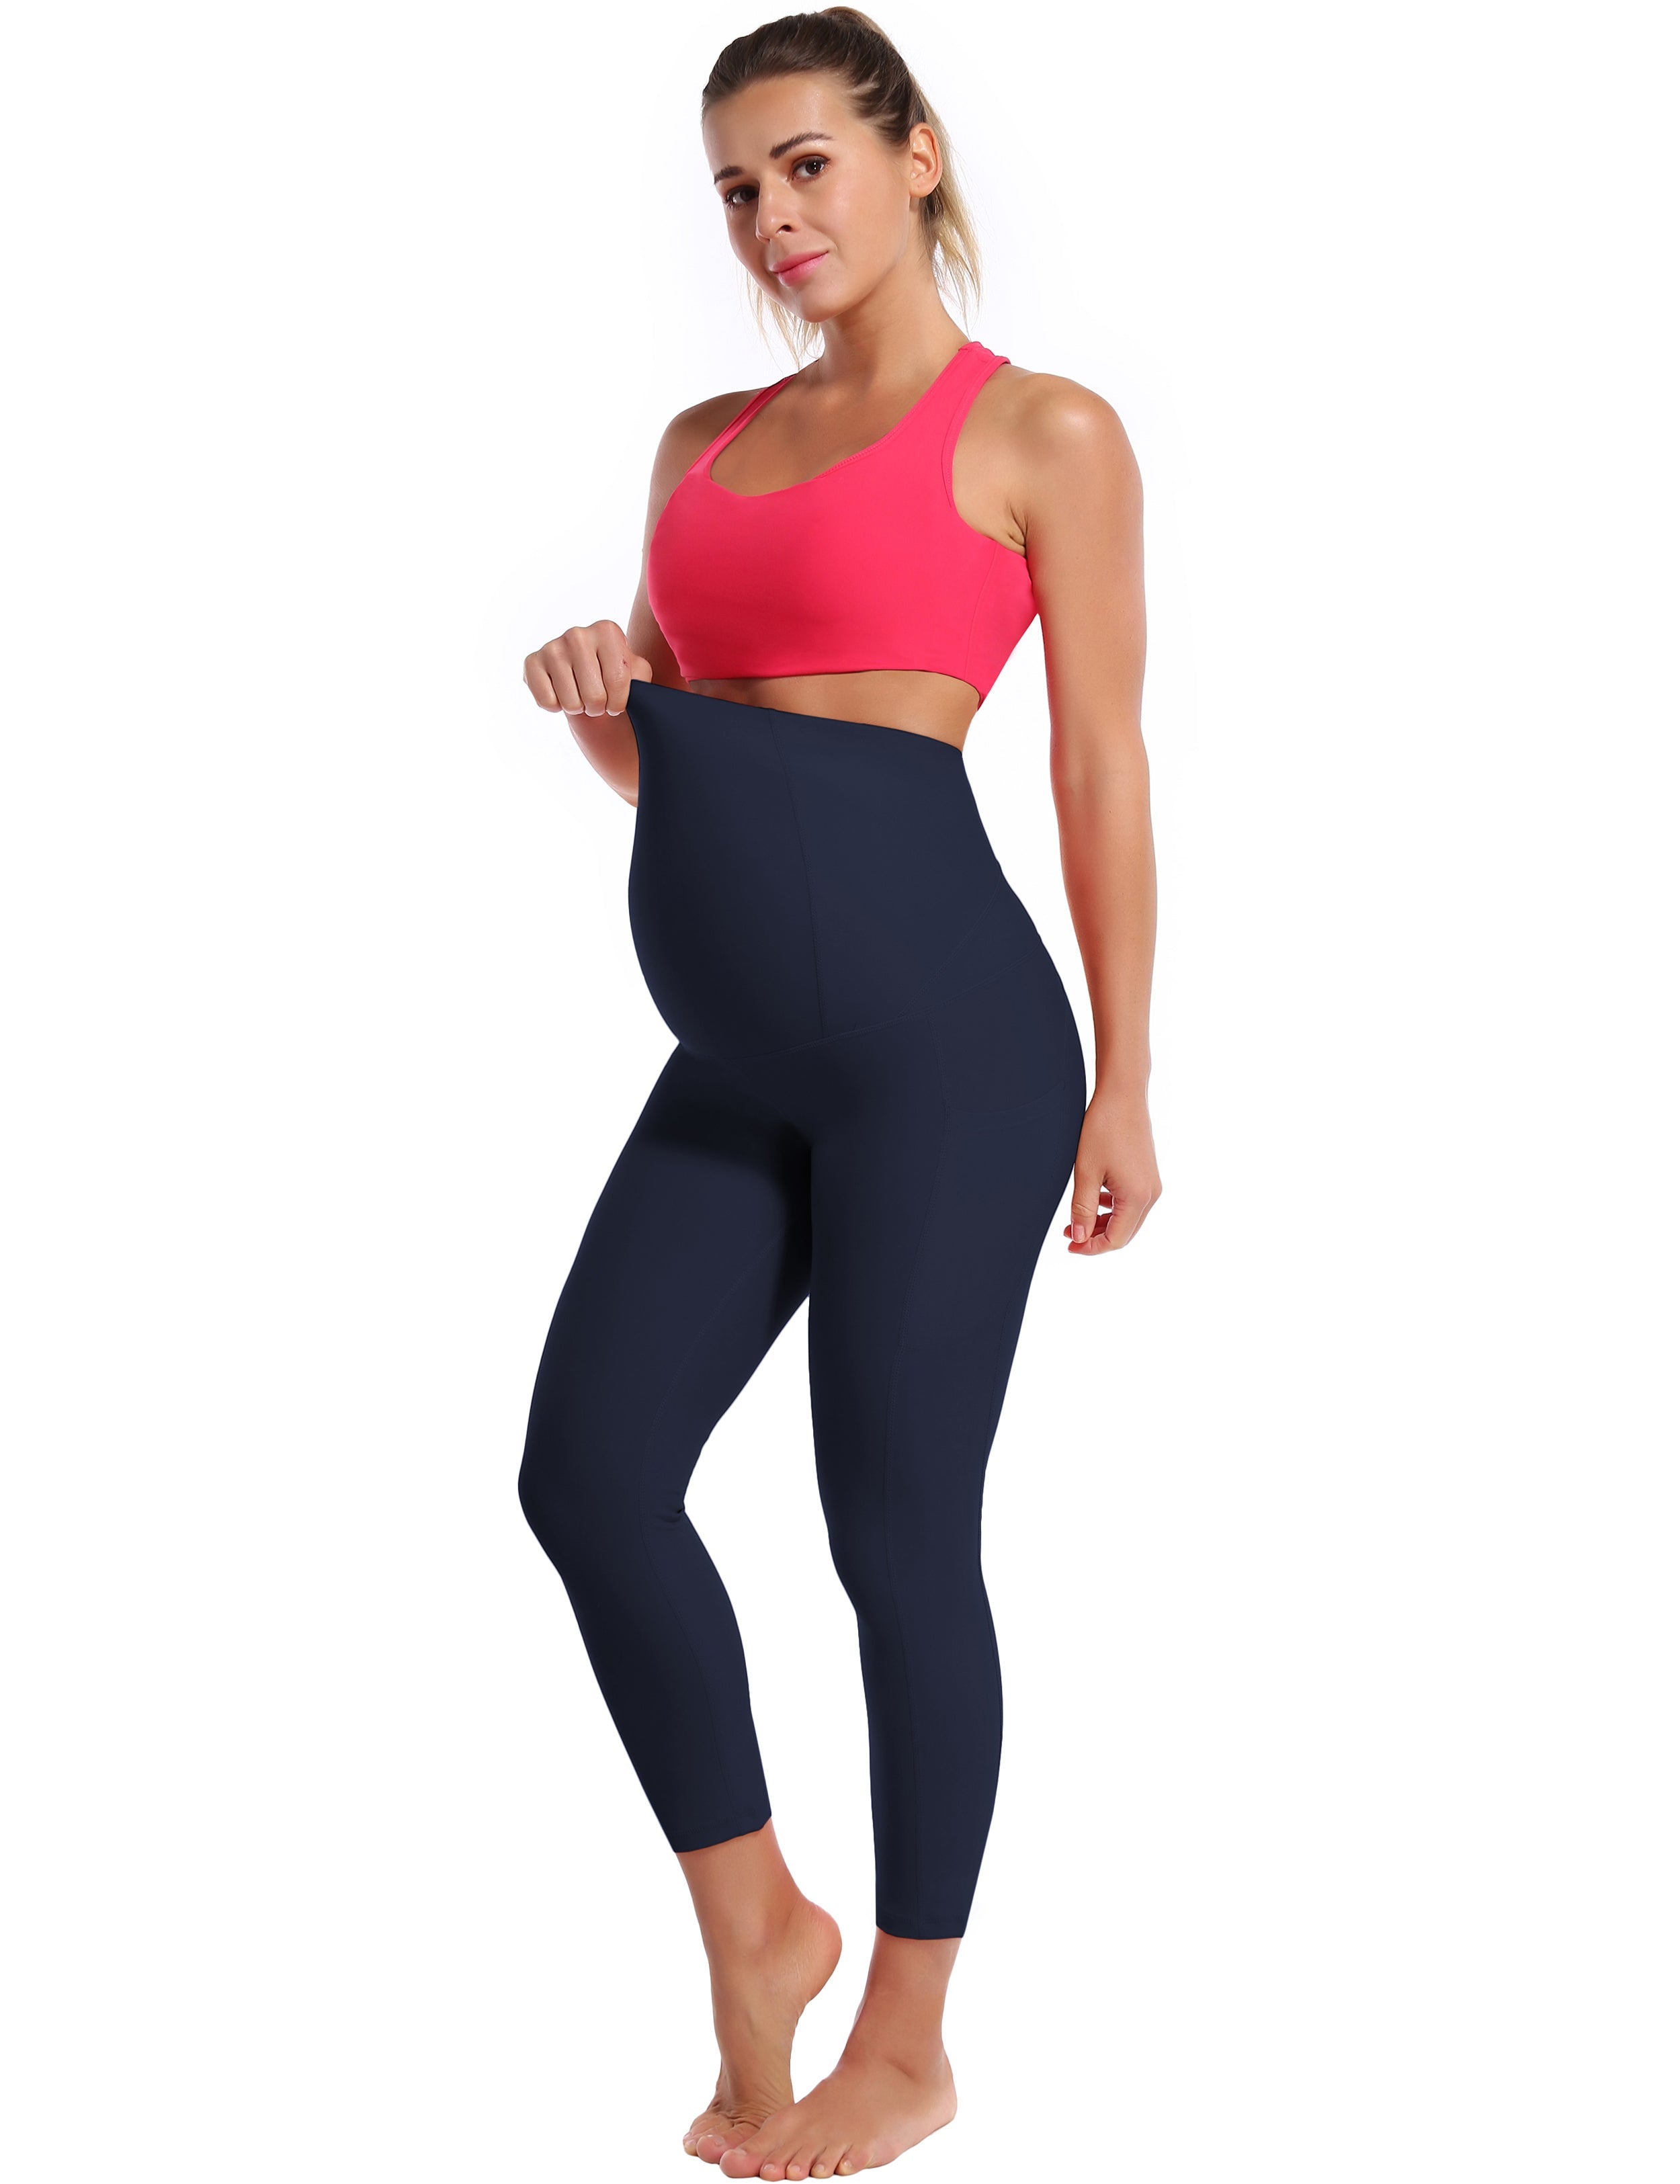 22" Side Pockets Maternity Gym Pants darknavy 87%Nylon/13%Spandex Softest-ever fabric High elasticity 4-way stretch Fabric doesn't attract lint easily No see-through Moisture-wicking Machine wash